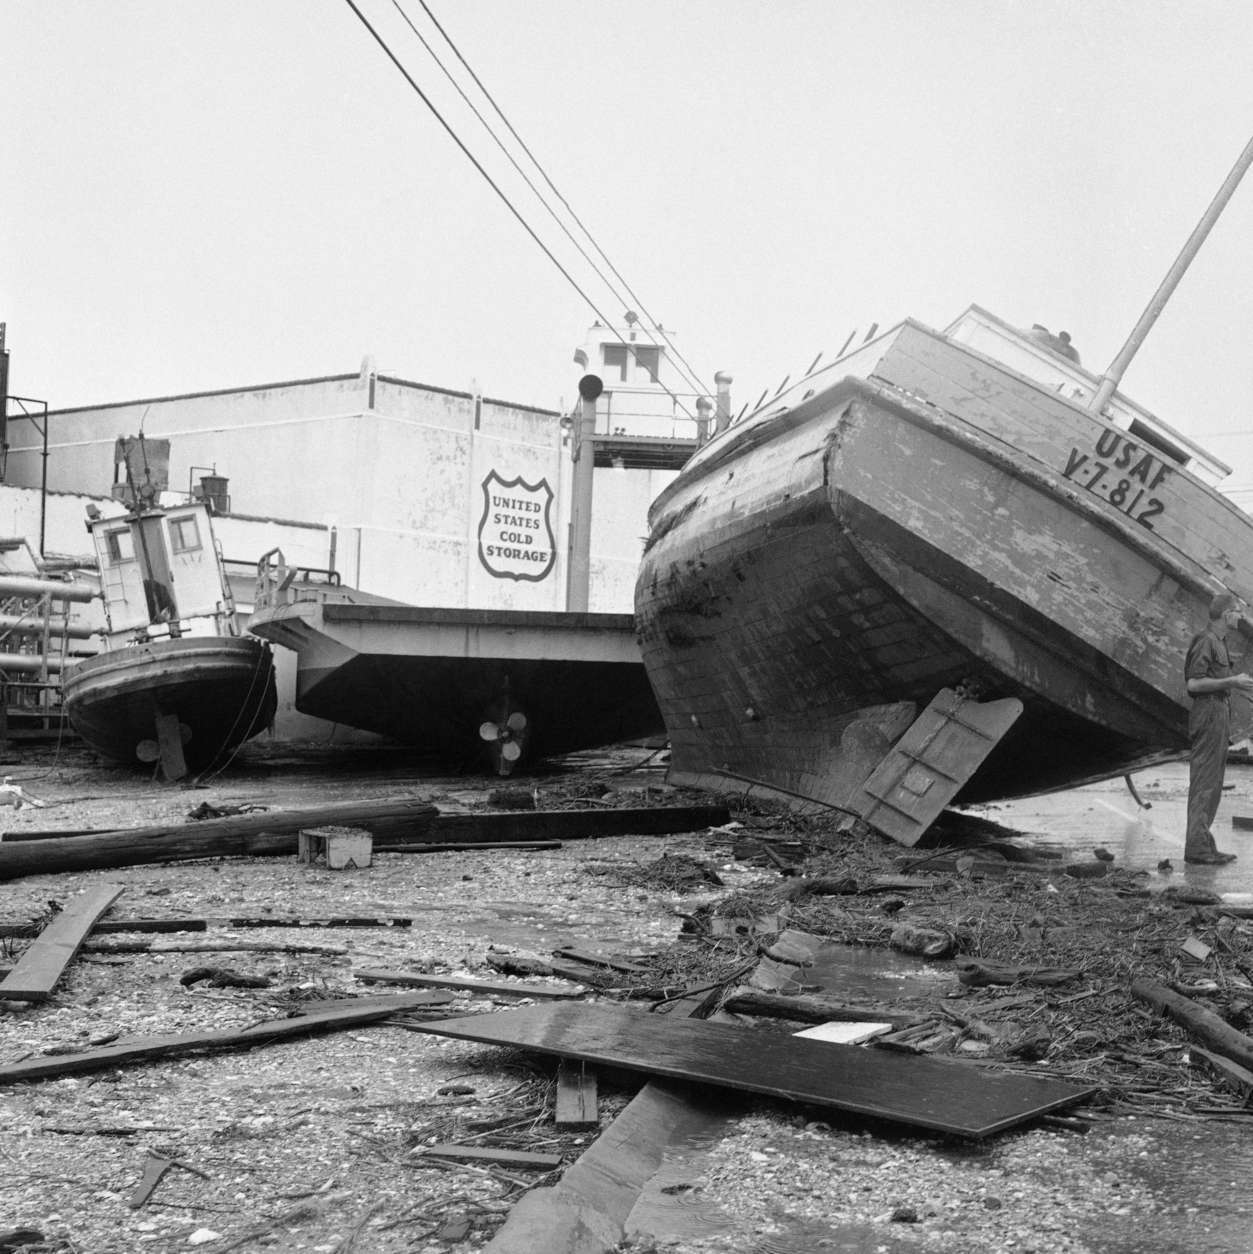 Tugboats, barges and fishing vessels litter the waterfront at Port Lavaca, Texas on Sept. 12, 1961 after hurricane Carla passed through during the night. Damage in the waterfront area of this coastal city was heavy. (AP Photo/Ted Powers)